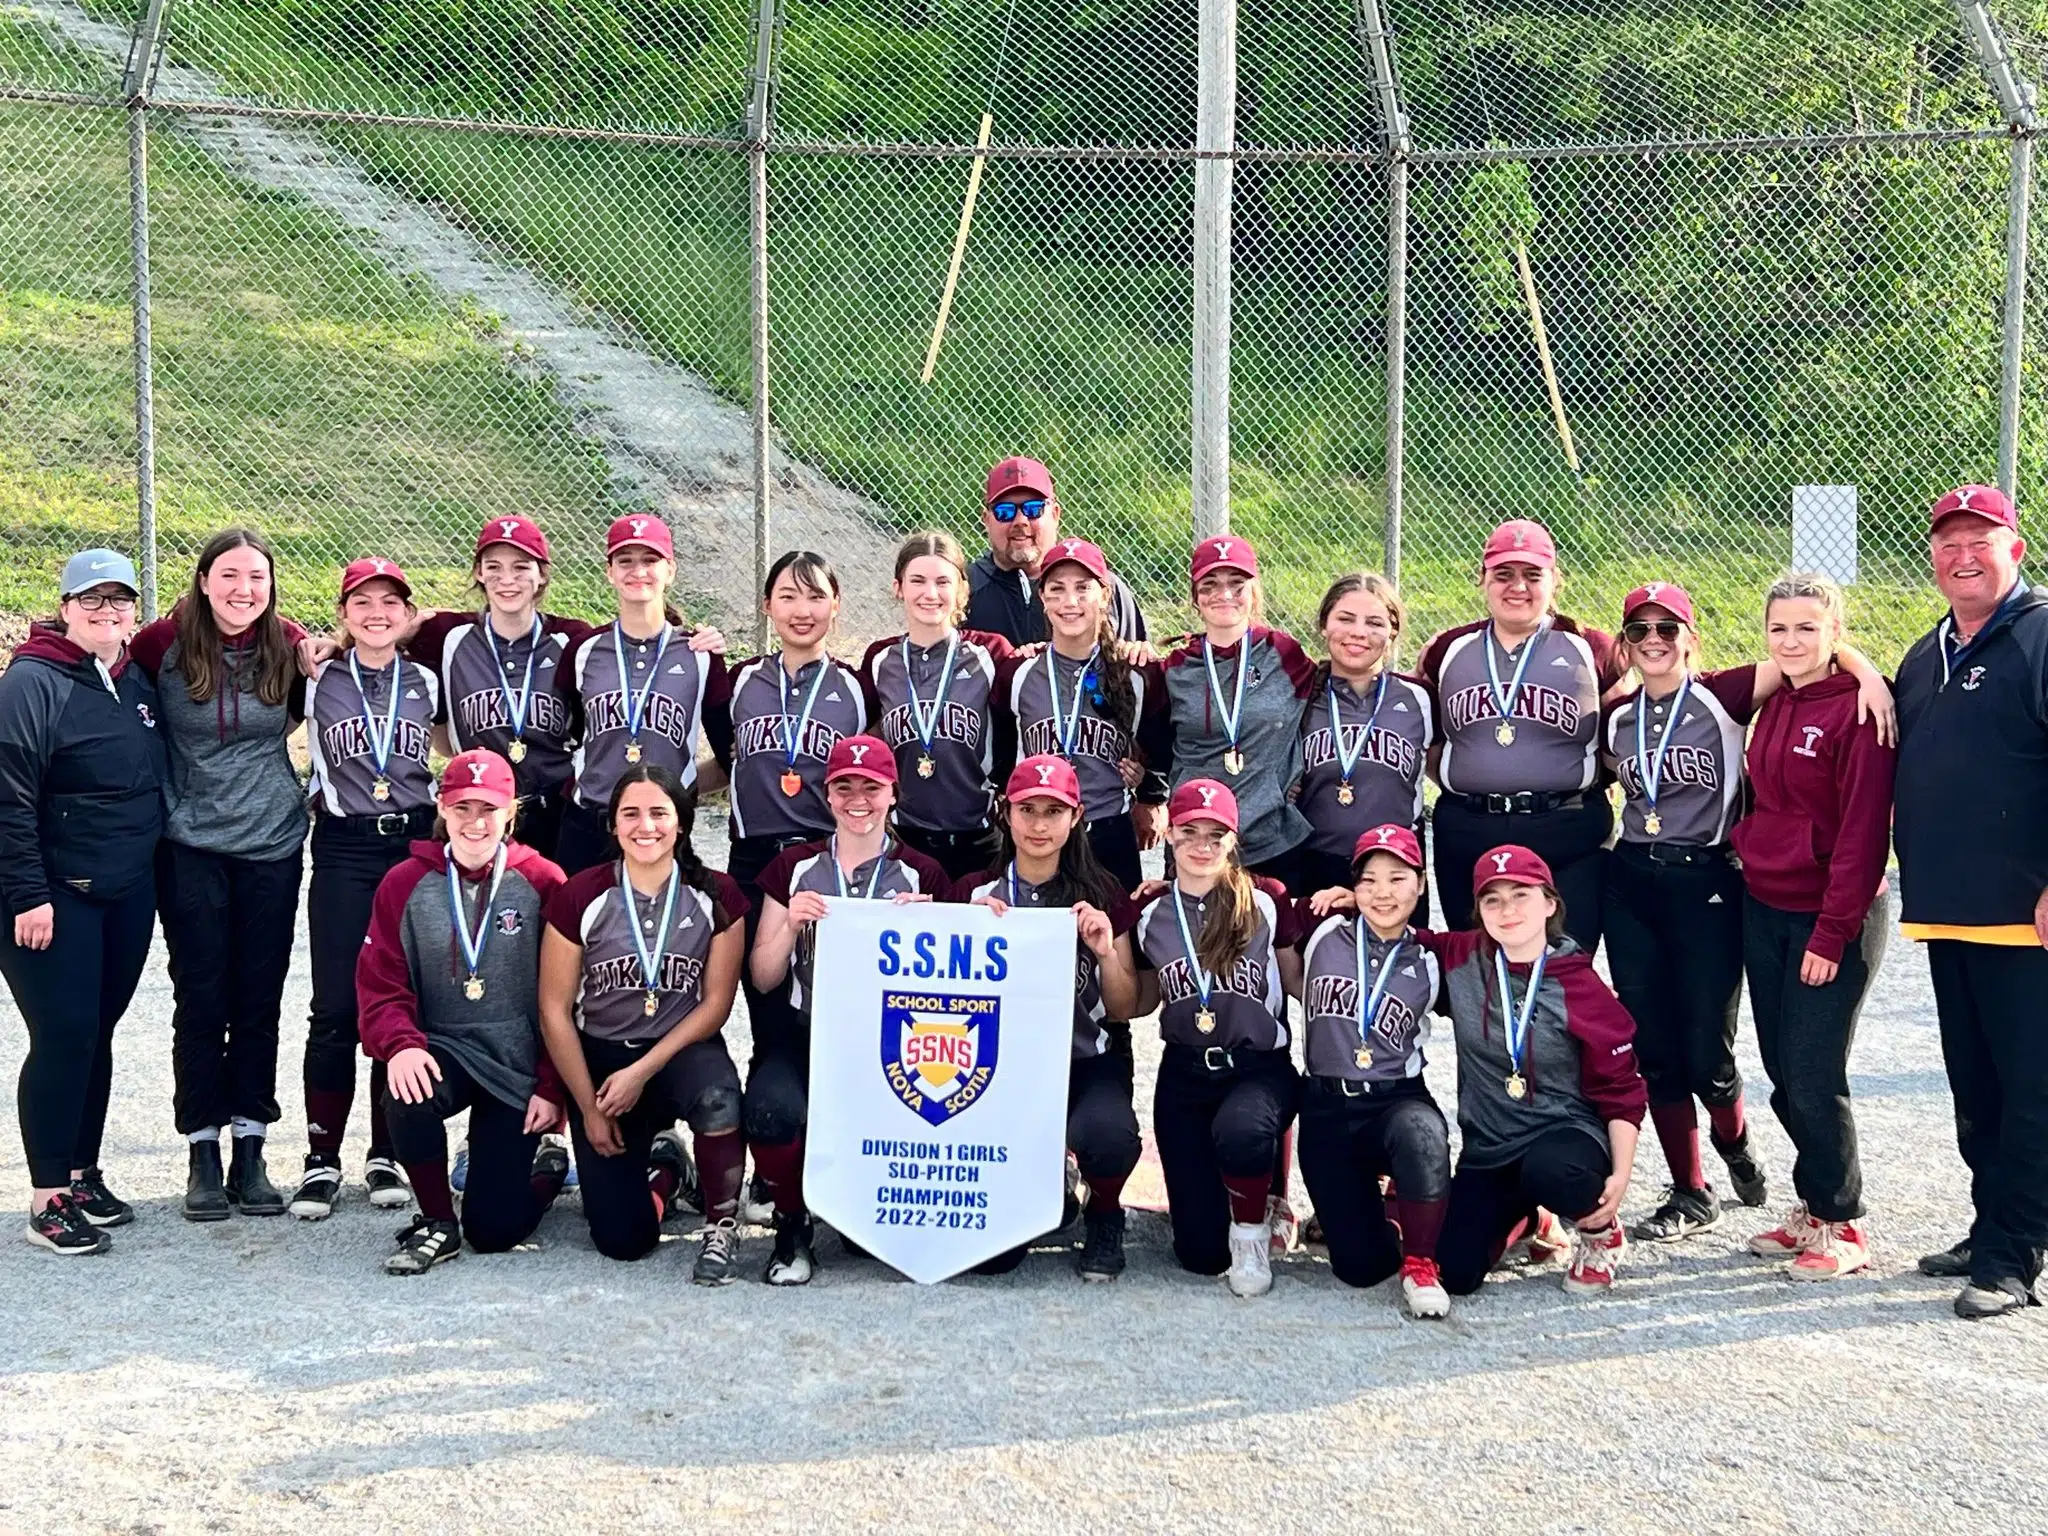 YCMHS girls win slo-pitch provincials